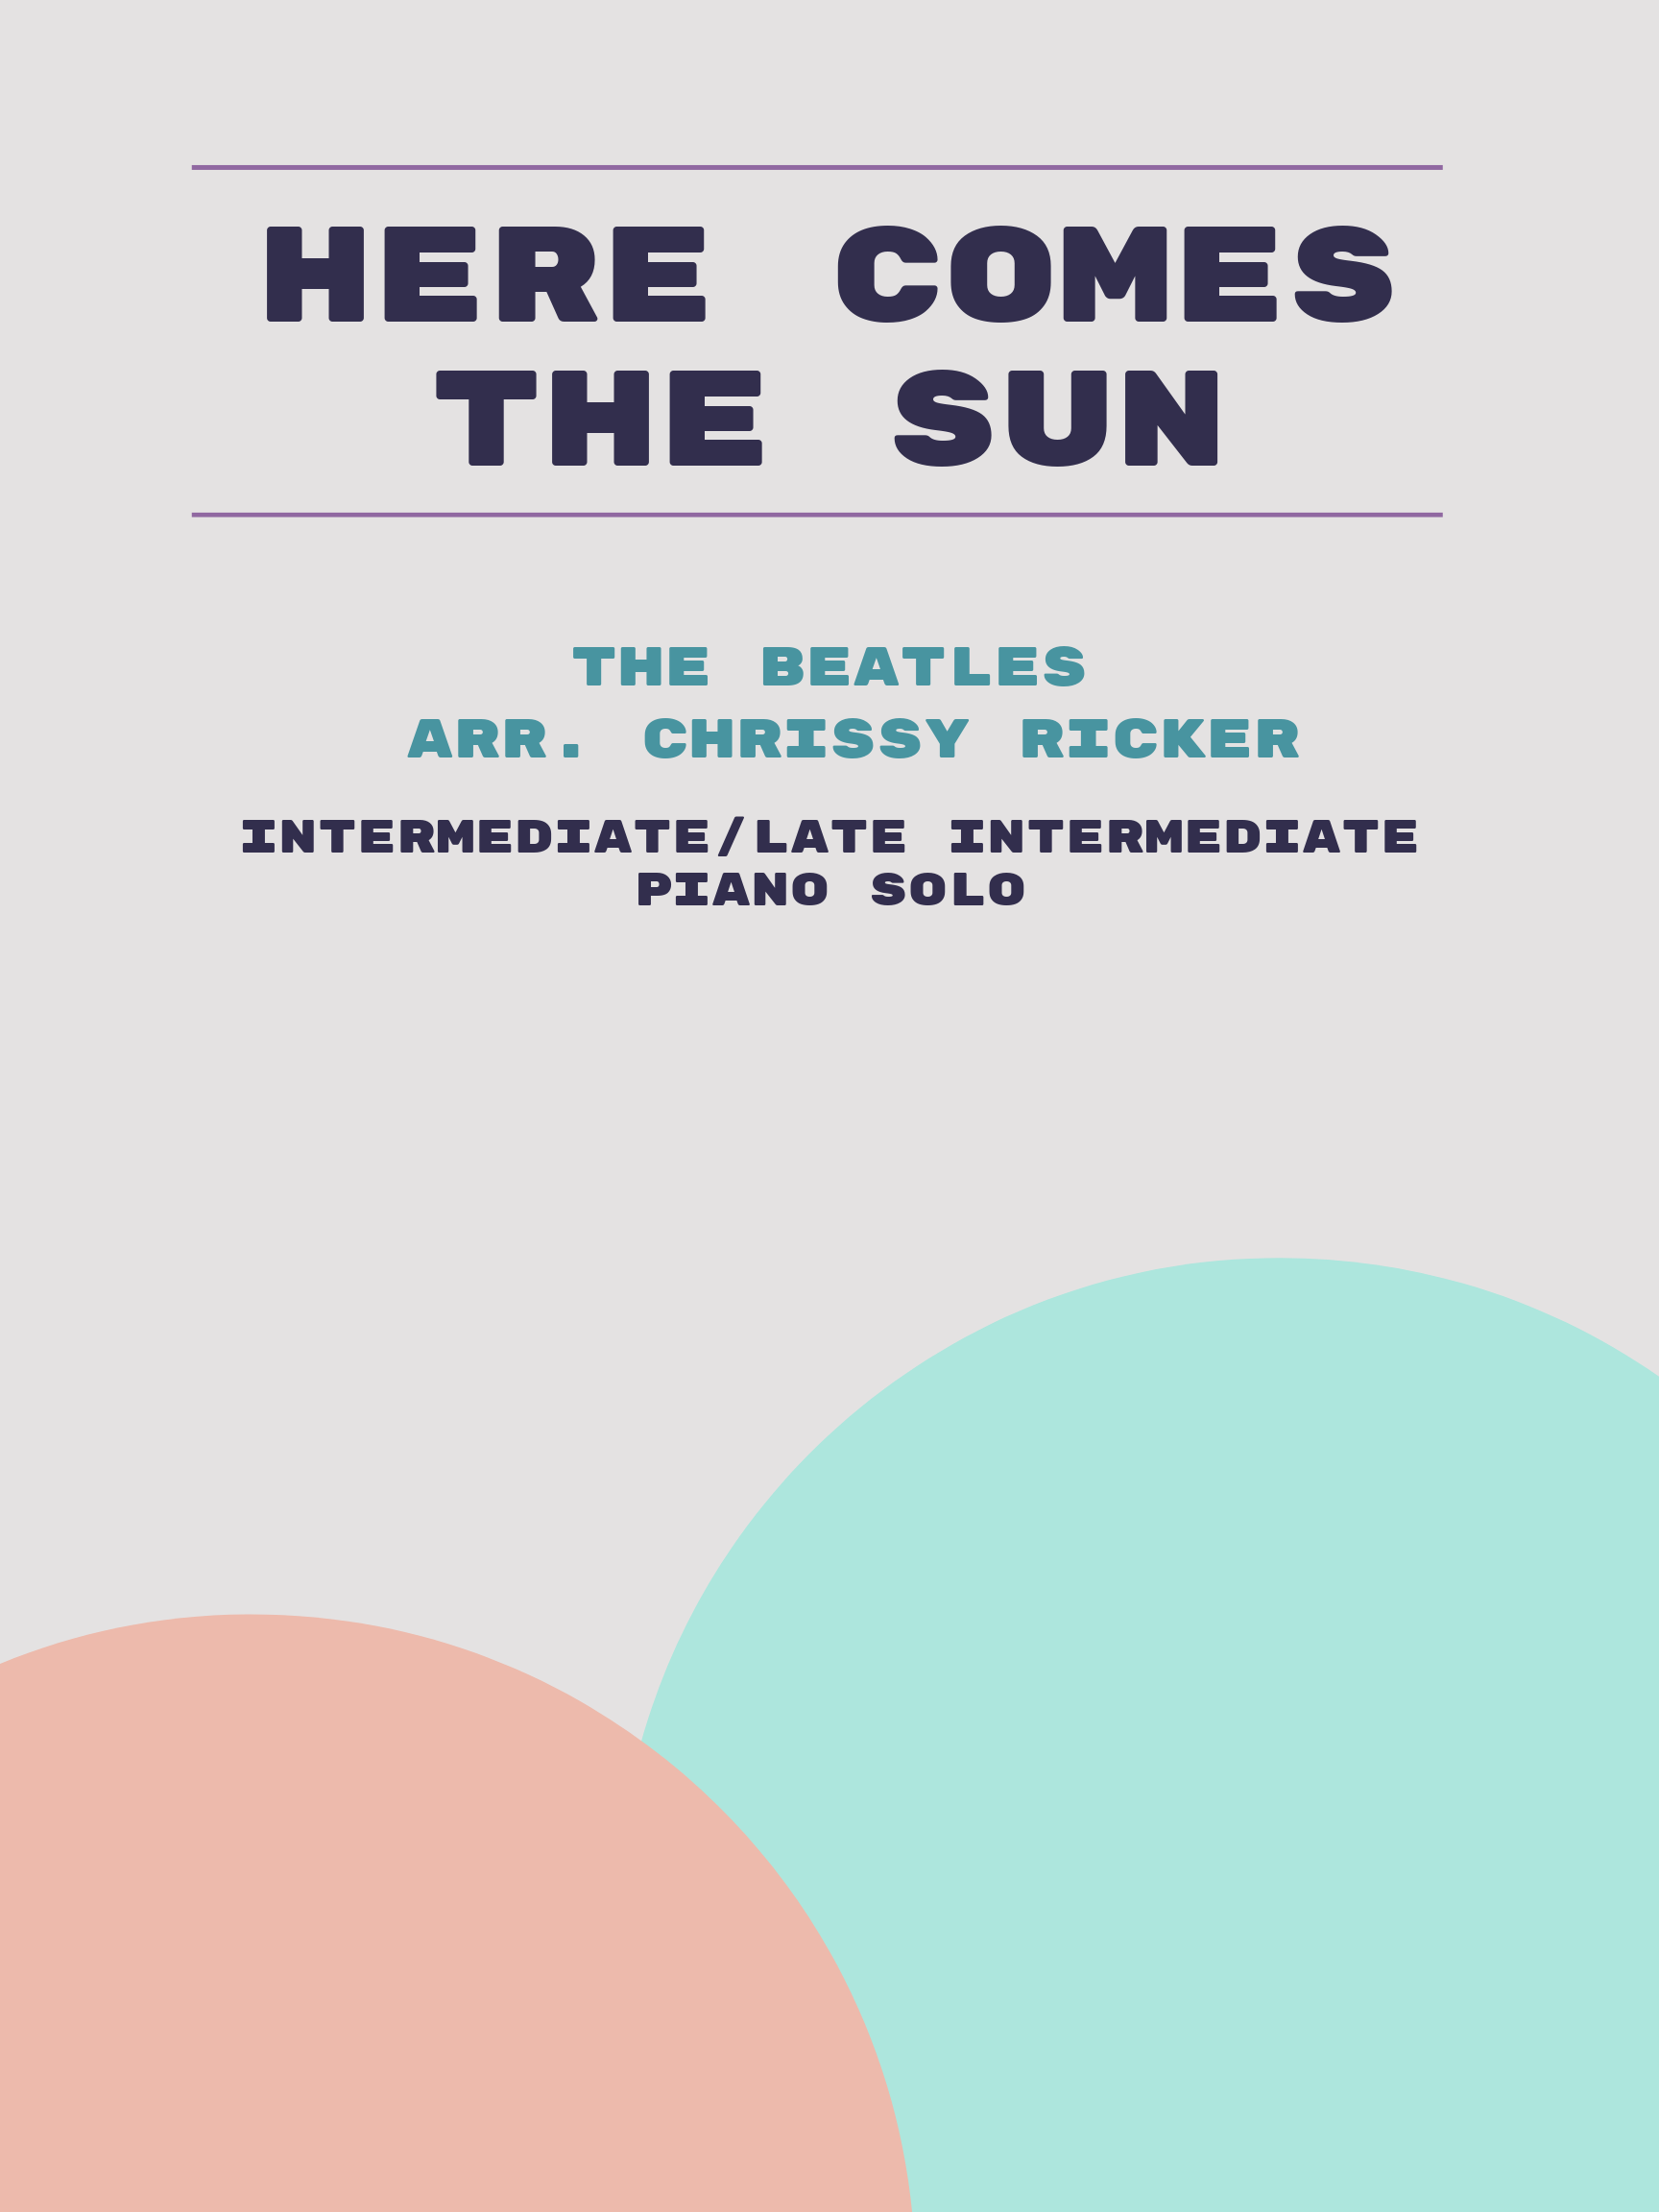 Here Comes the Sun by The Beatles